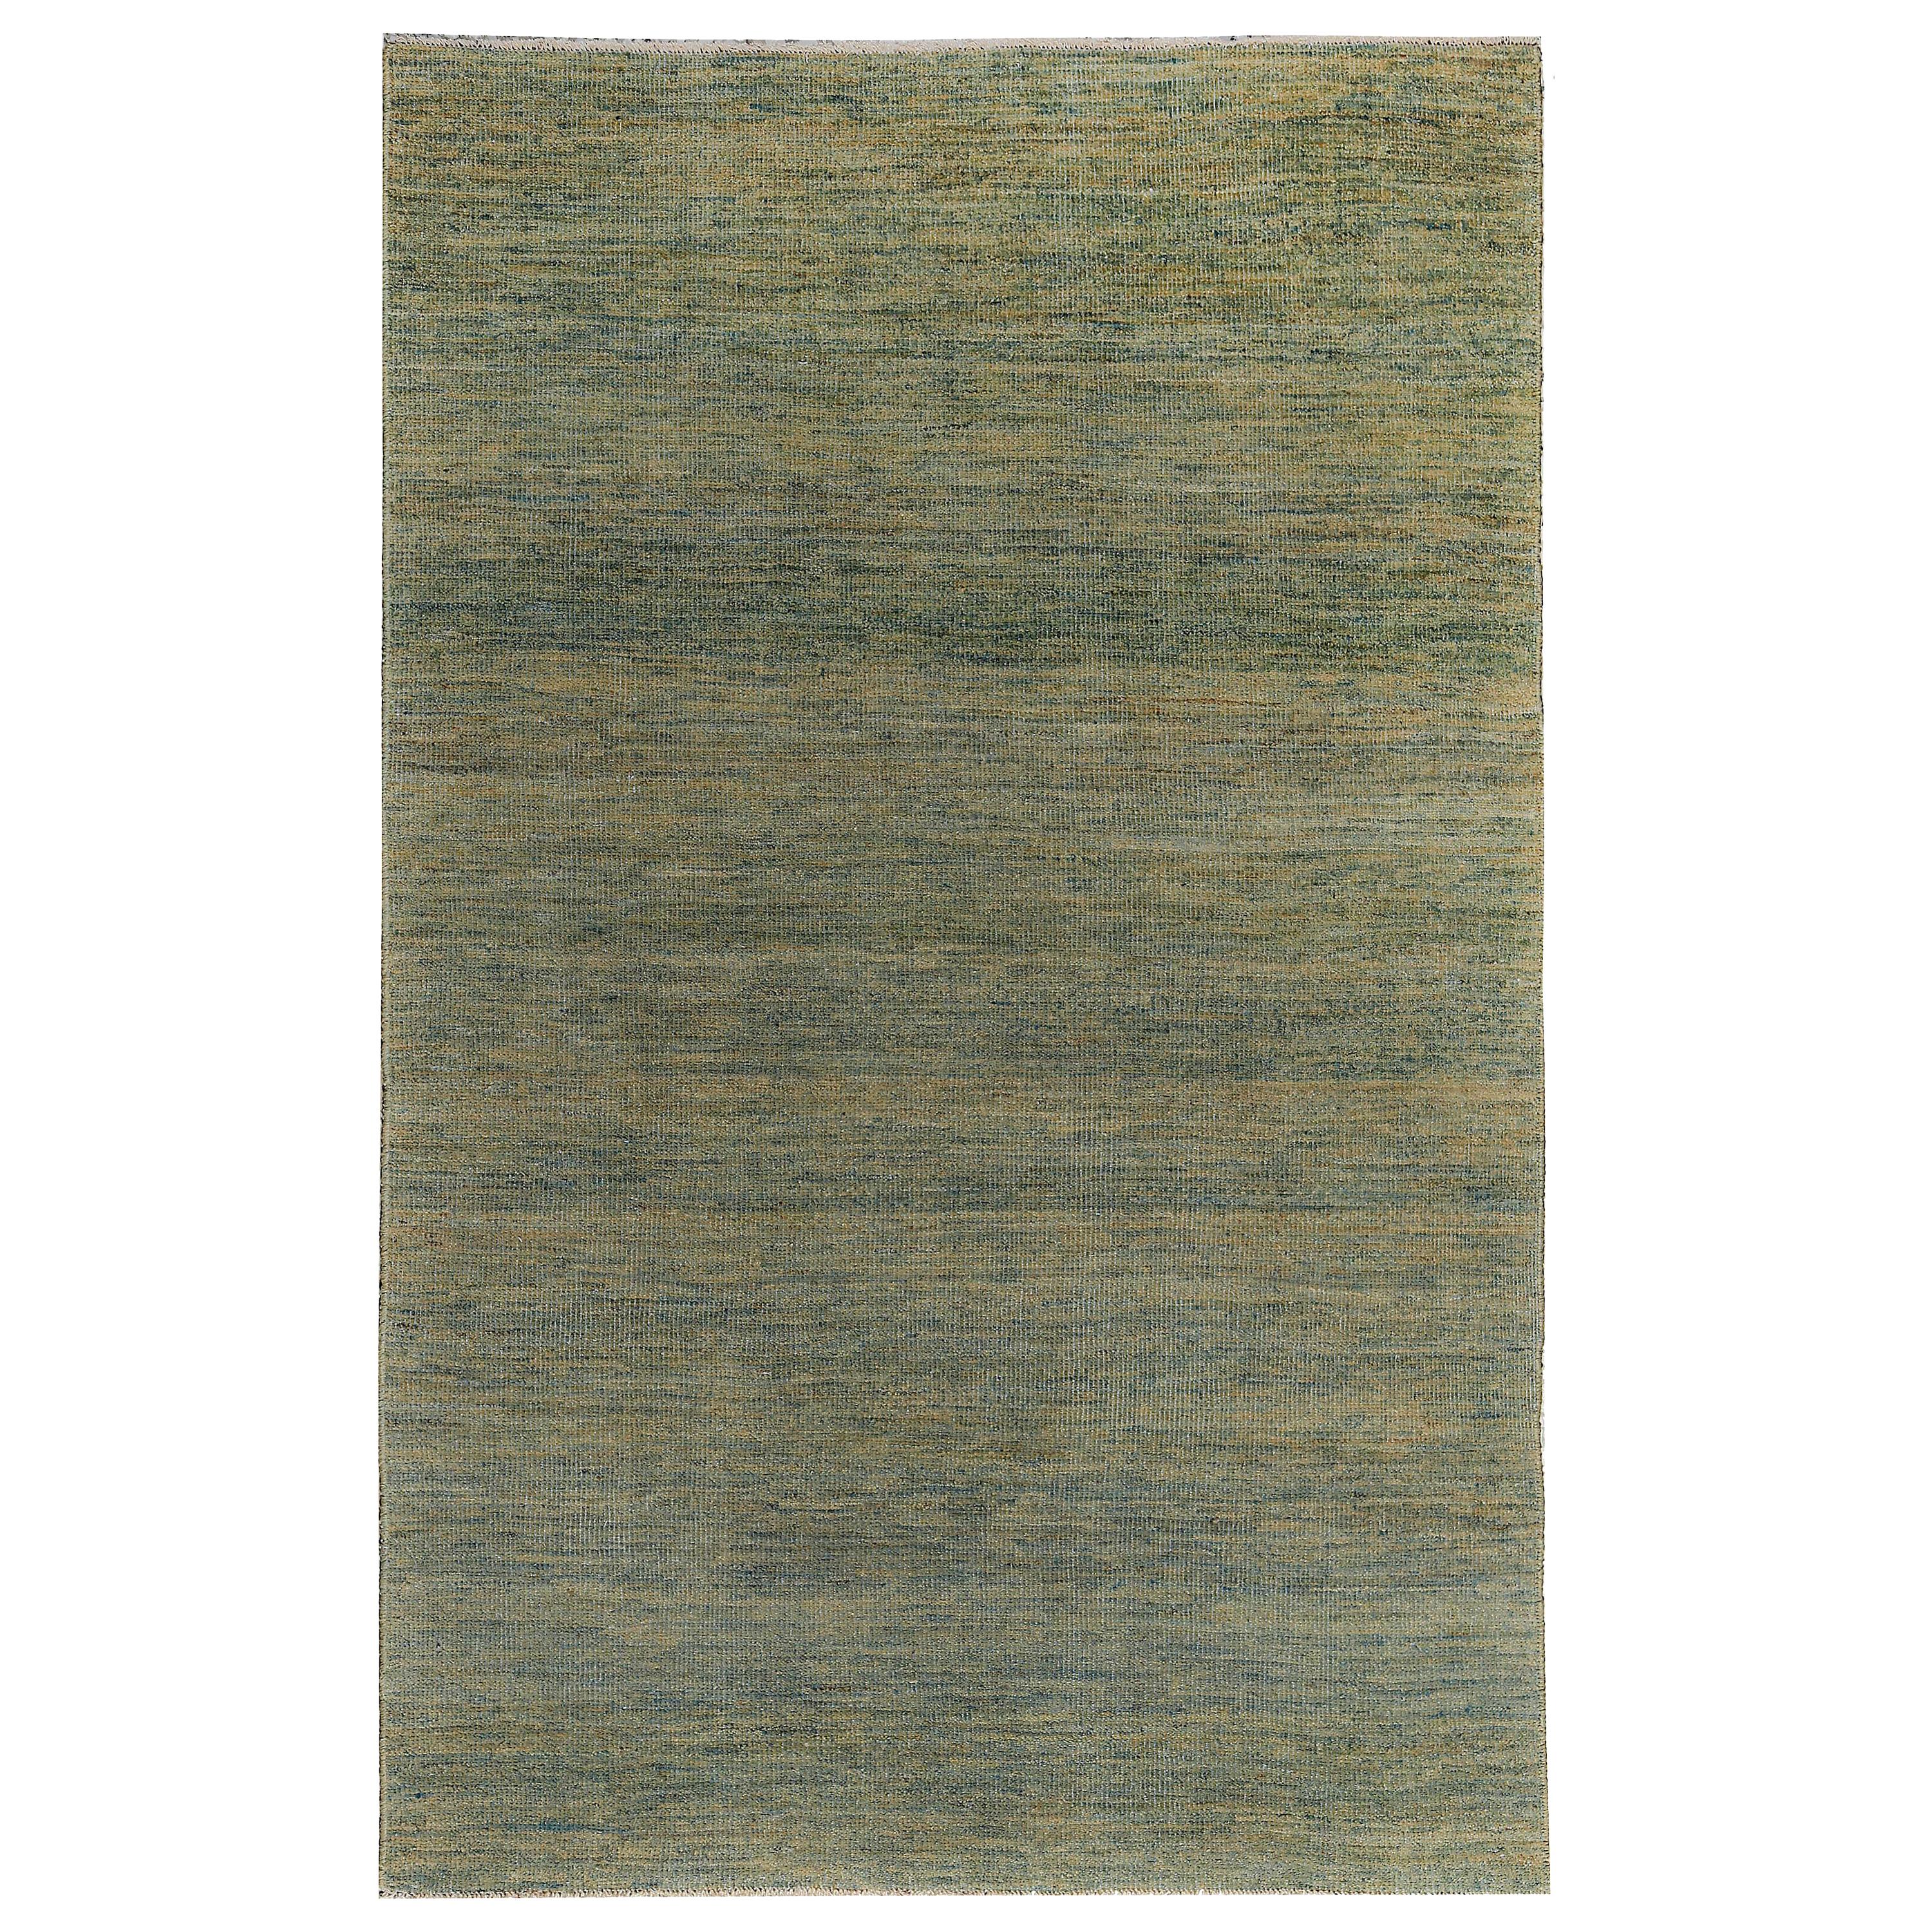 Turkish Rug Sultanabad Style with Gray & Green Botanical Details on Ivory Field